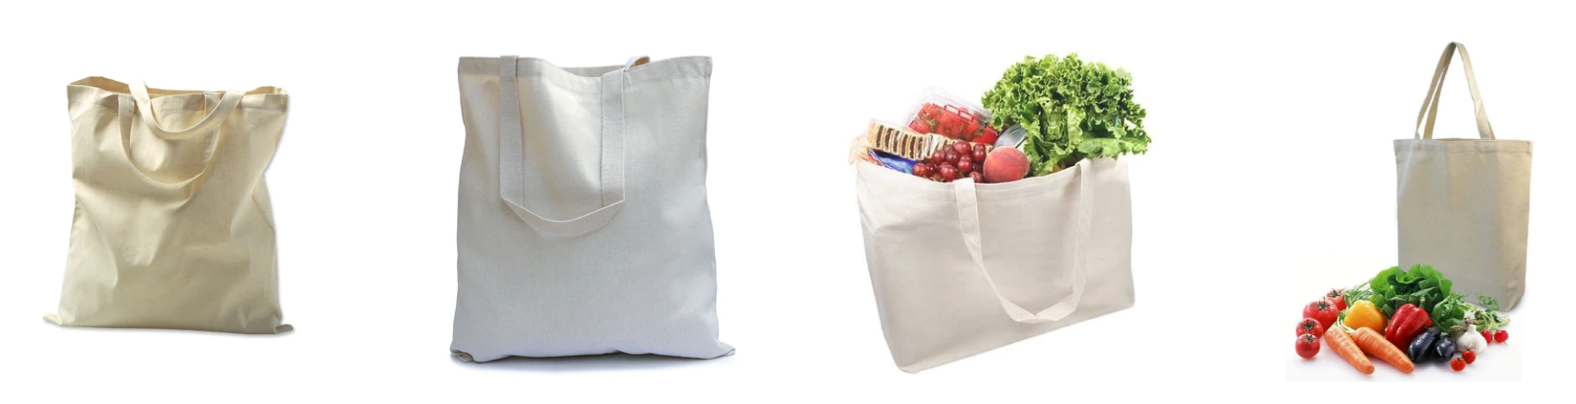 Pergee has quality plain canvas cotton tote bags at affordable bulk prices.